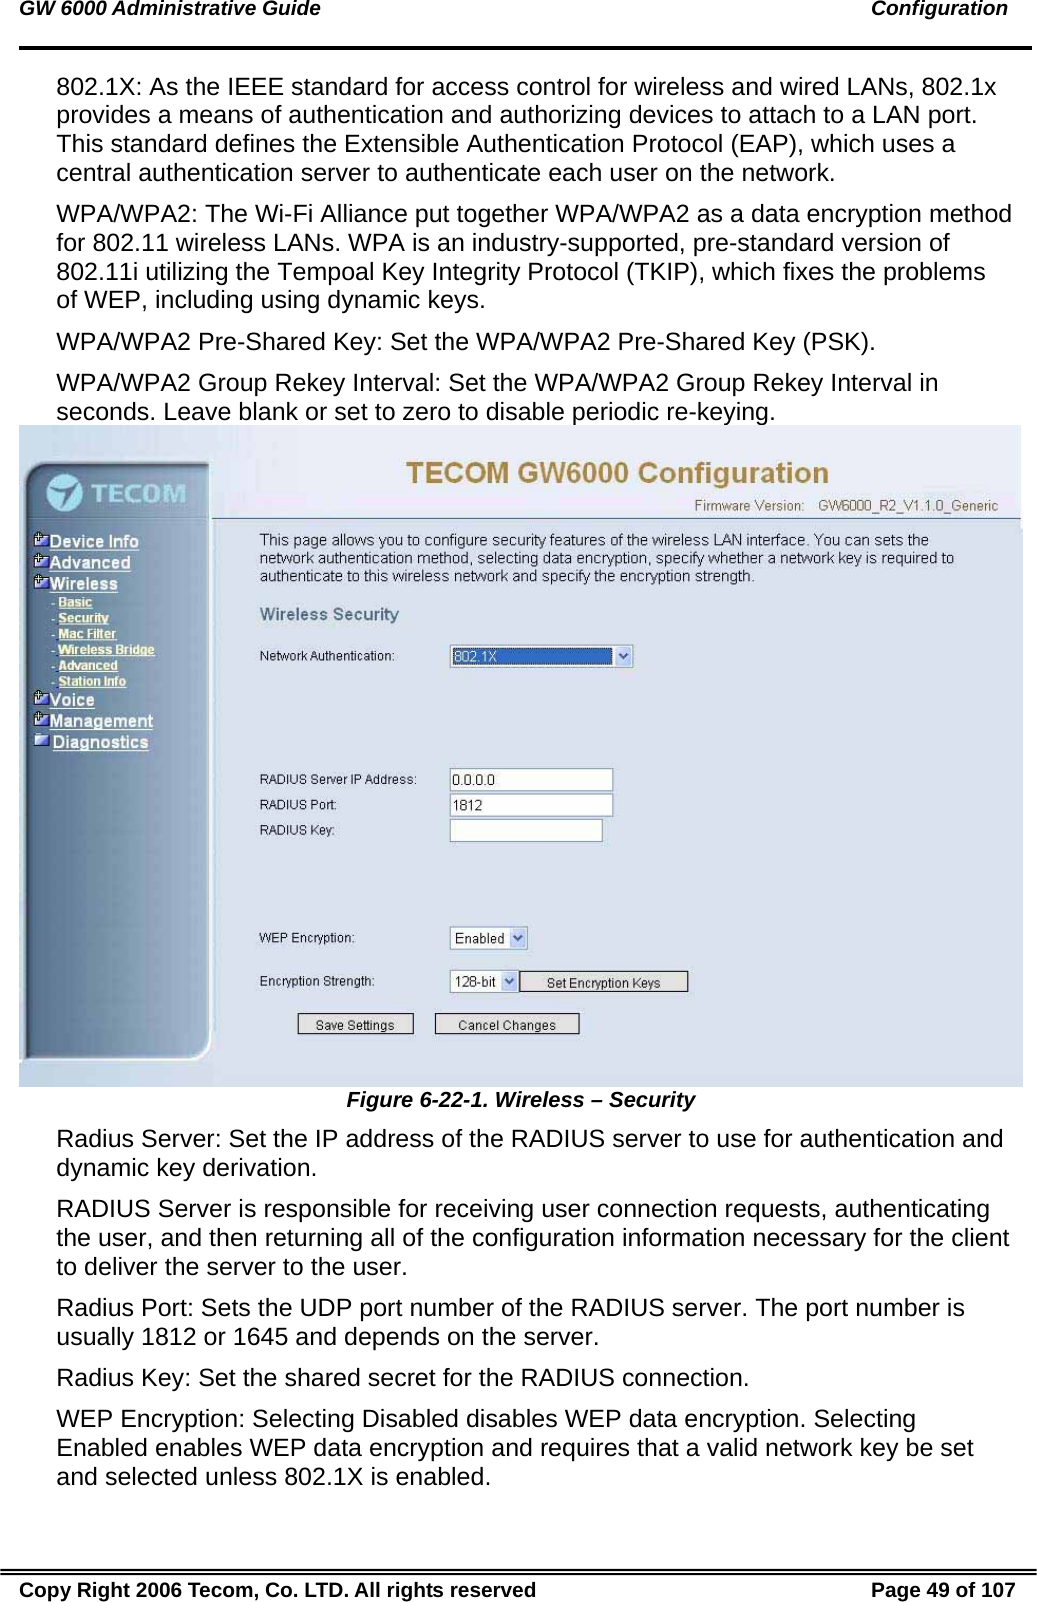 GW 6000 Administrative Guide                                                                                               Configuration 802.1X: As the IEEE standard for access control for wireless and wired LANs, 802.1x provides a means of authentication and authorizing devices to attach to a LAN port. This standard defines the Extensible Authentication Protocol (EAP), which uses a central authentication server to authenticate each user on the network. WPA/WPA2: The Wi-Fi Alliance put together WPA/WPA2 as a data encryption method for 802.11 wireless LANs. WPA is an industry-supported, pre-standard version of 802.11i utilizing the Tempoal Key Integrity Protocol (TKIP), which fixes the problems of WEP, including using dynamic keys. WPA/WPA2 Pre-Shared Key: Set the WPA/WPA2 Pre-Shared Key (PSK). WPA/WPA2 Group Rekey Interval: Set the WPA/WPA2 Group Rekey Interval in seconds. Leave blank or set to zero to disable periodic re-keying.  Figure 6-22-1. Wireless – Security Radius Server: Set the IP address of the RADIUS server to use for authentication and dynamic key derivation. RADIUS Server is responsible for receiving user connection requests, authenticating the user, and then returning all of the configuration information necessary for the client to deliver the server to the user. Radius Port: Sets the UDP port number of the RADIUS server. The port number is usually 1812 or 1645 and depends on the server. Radius Key: Set the shared secret for the RADIUS connection. WEP Encryption: Selecting Disabled disables WEP data encryption. Selecting Enabled enables WEP data encryption and requires that a valid network key be set and selected unless 802.1X is enabled. Copy Right 2006 Tecom, Co. LTD. All rights reserved  Page 49 of 107 